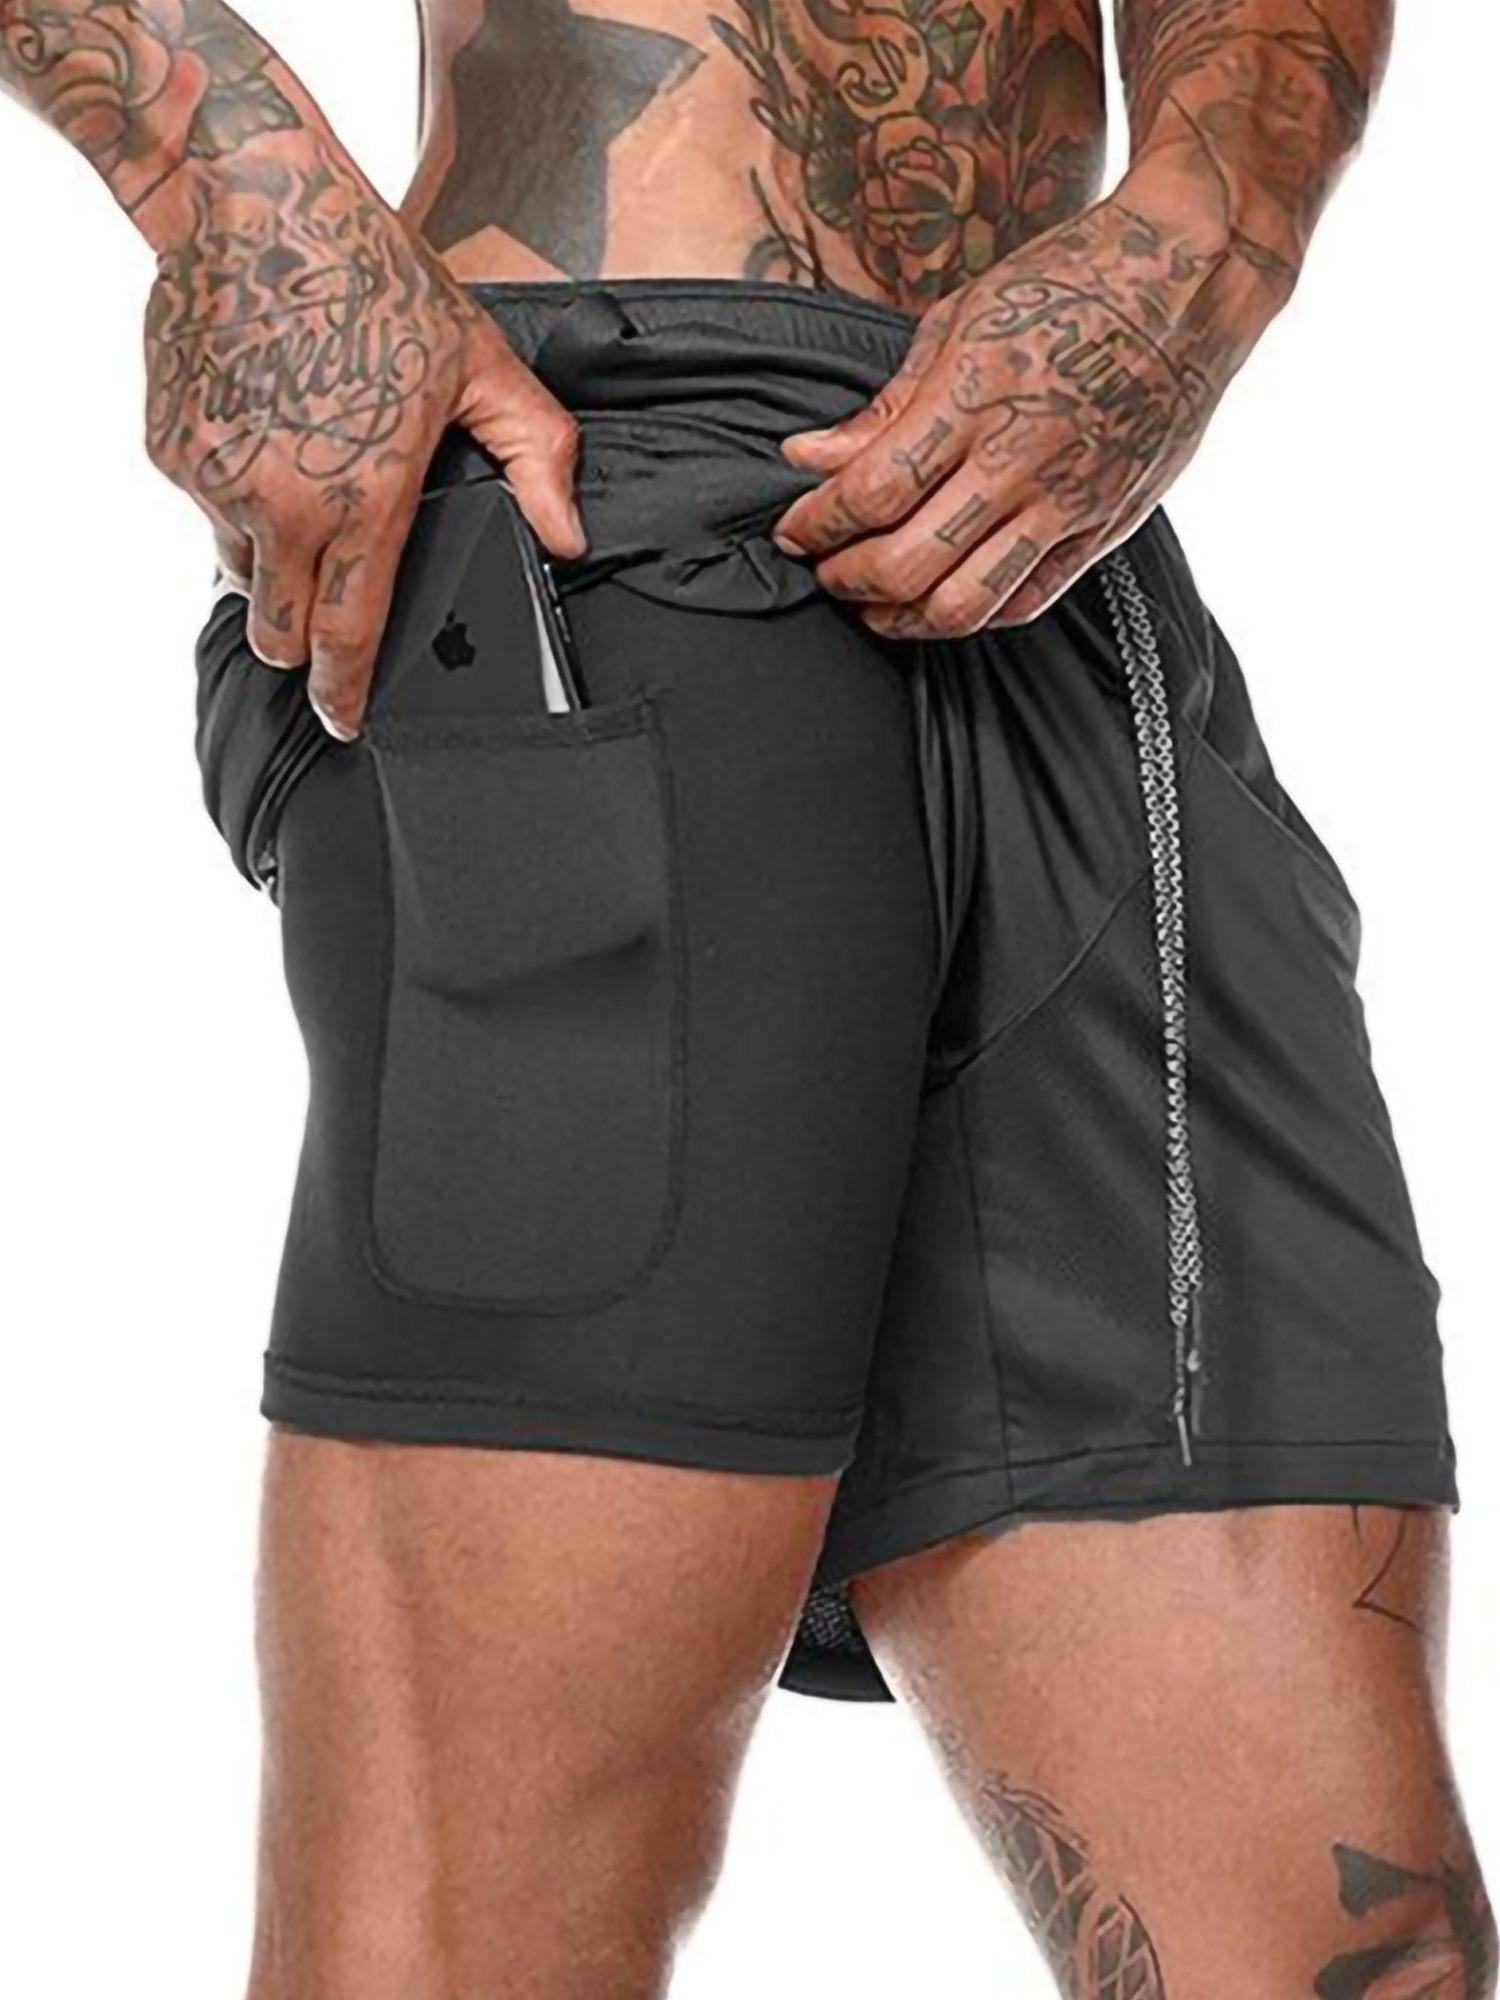 DADDY BABY Mens Comfort 8 Athletic Casual Gym Performance Sport Shorts with Built-in Underwear and Zipper Pockets